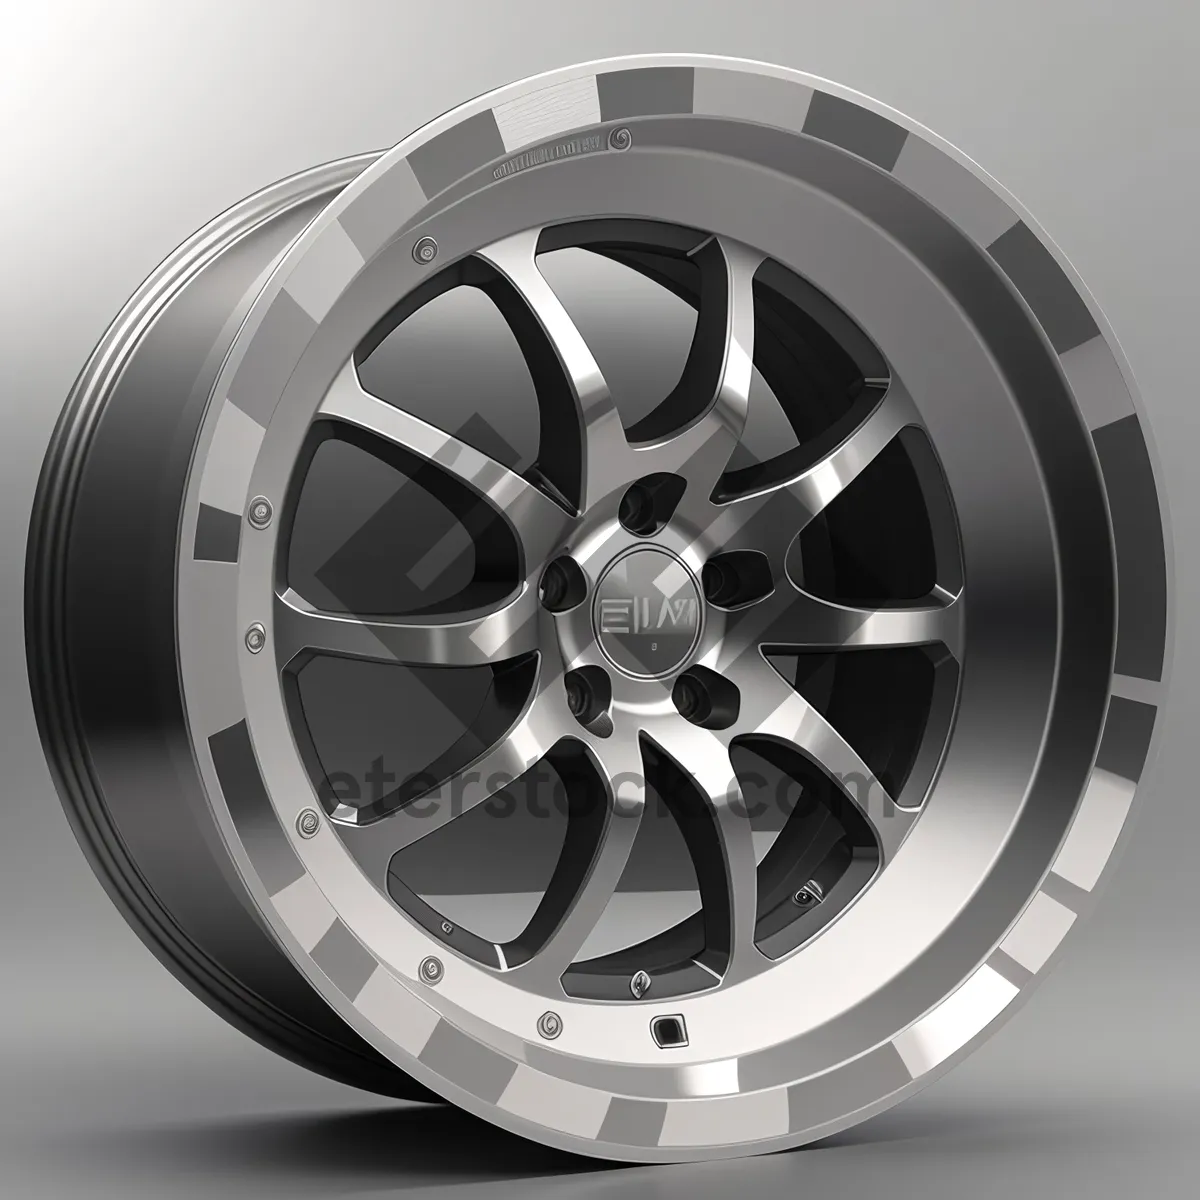 Picture of Shiny Black Car Wheel in High-Tech Style